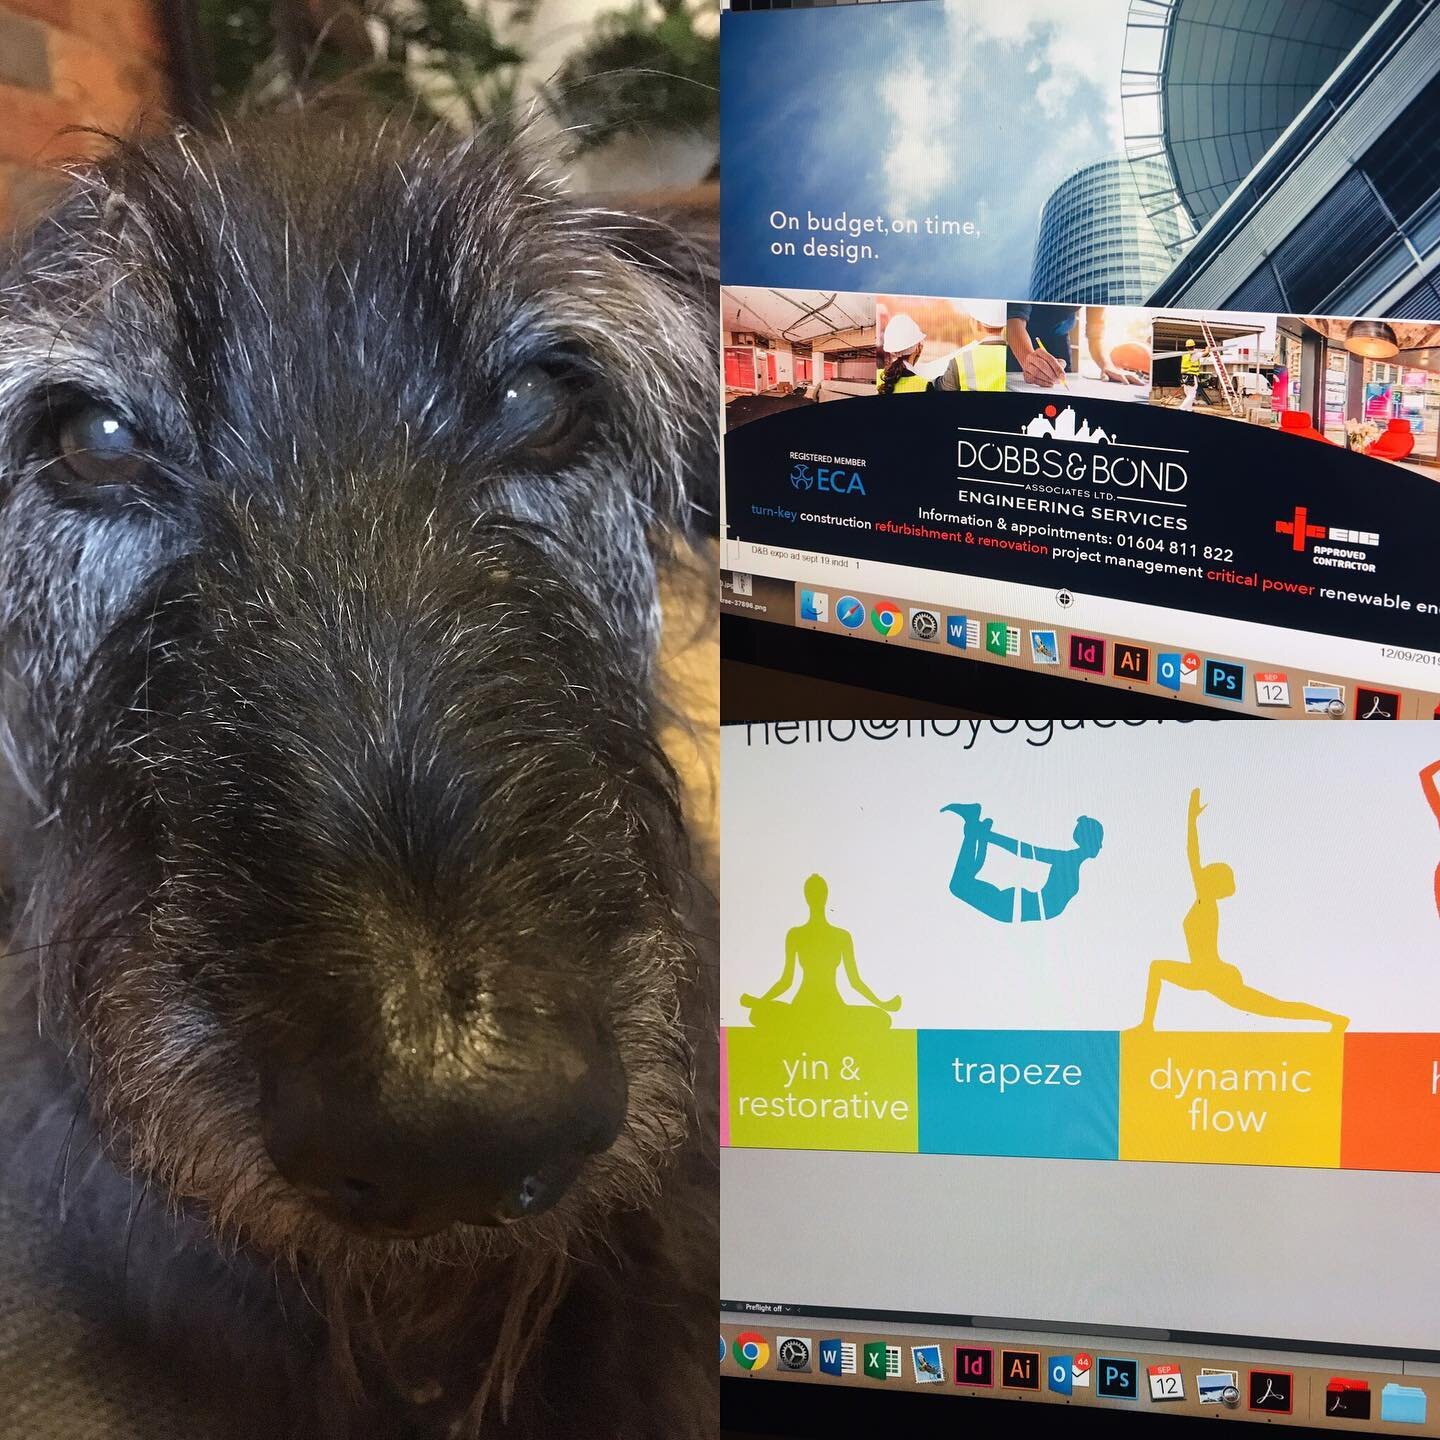 Designing for construction &amp; yoga companies today. ❤️the contrast. Hairier Manager would like me to focus on supper design now so its home time... #officedog #lovemyjob #advertisingdesign  #businesscardsdesign